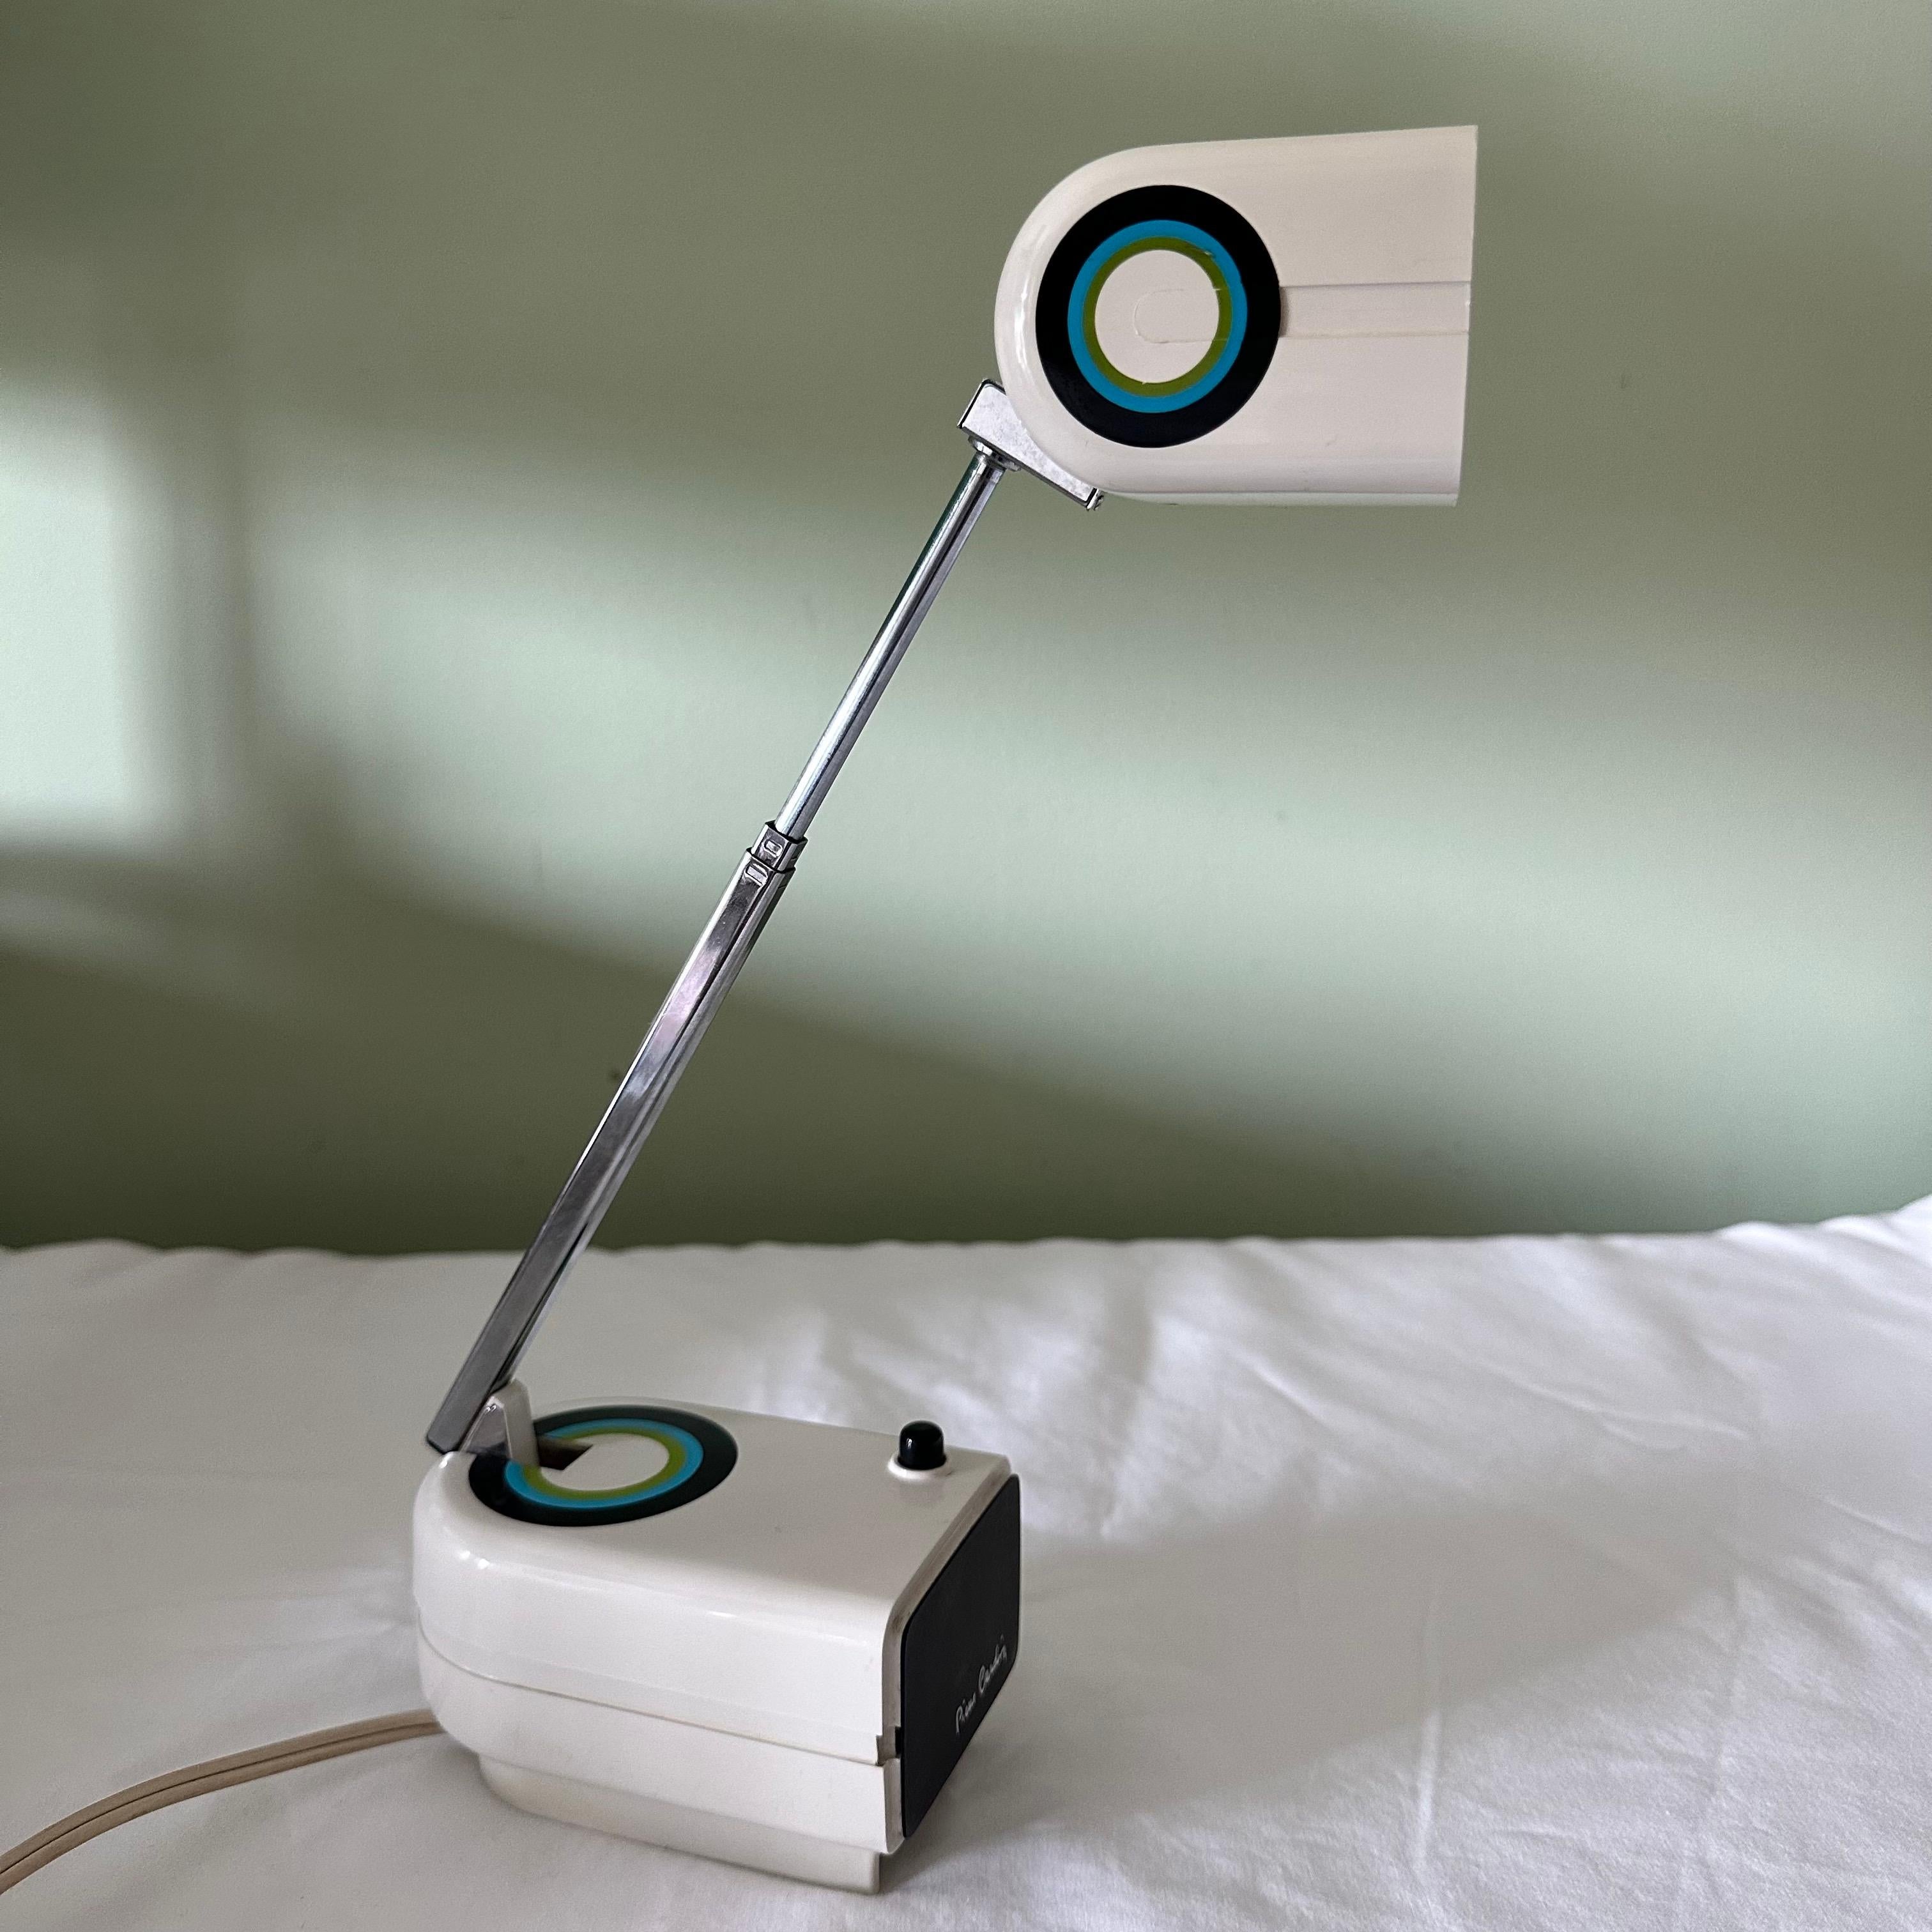 Japanese Pierre Cardin Space Age Telescopic Table Lamp in White, Blue, Green & Black For Sale